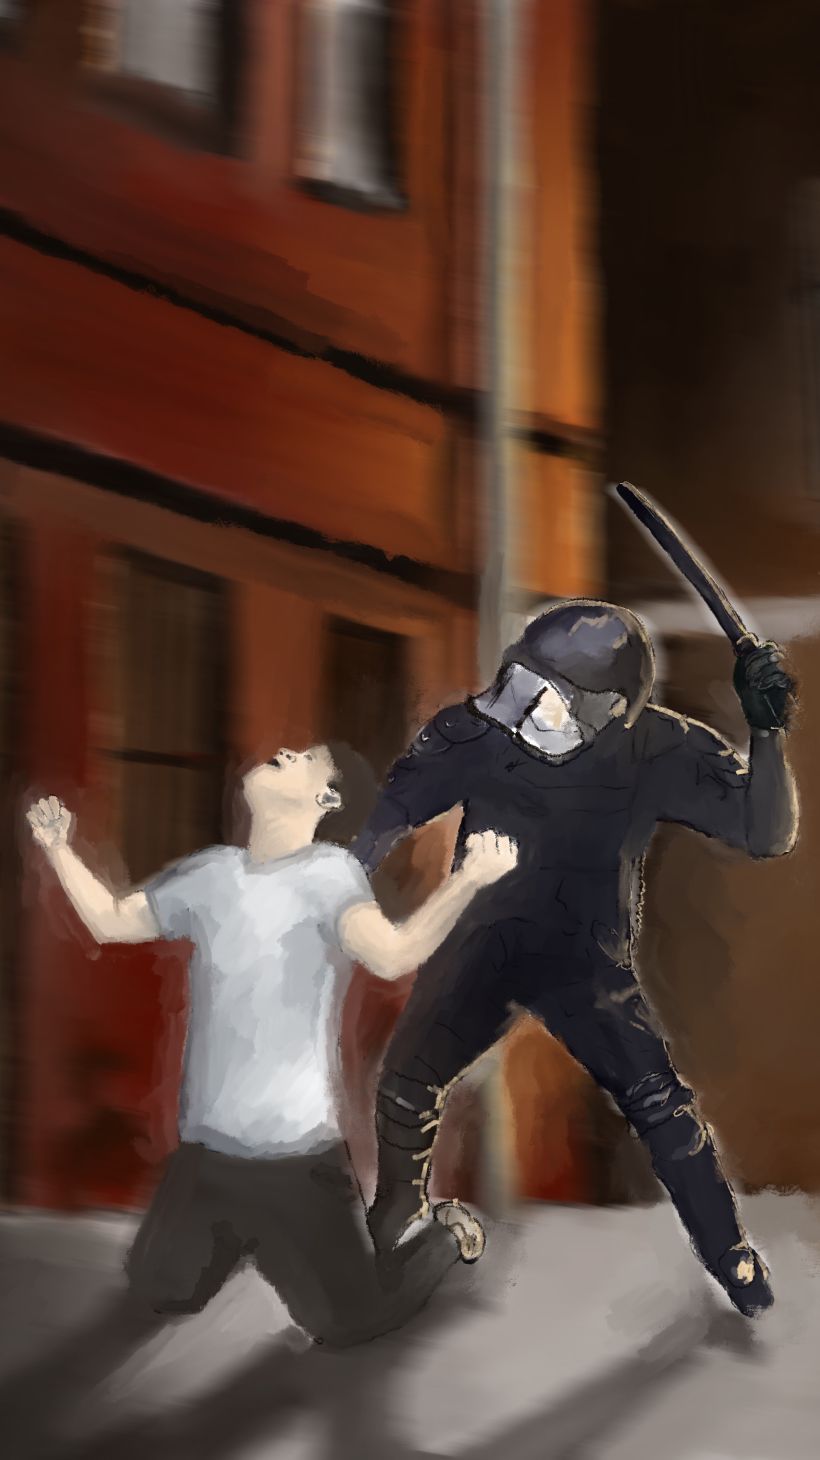 Drawing of a policeman beating a protester